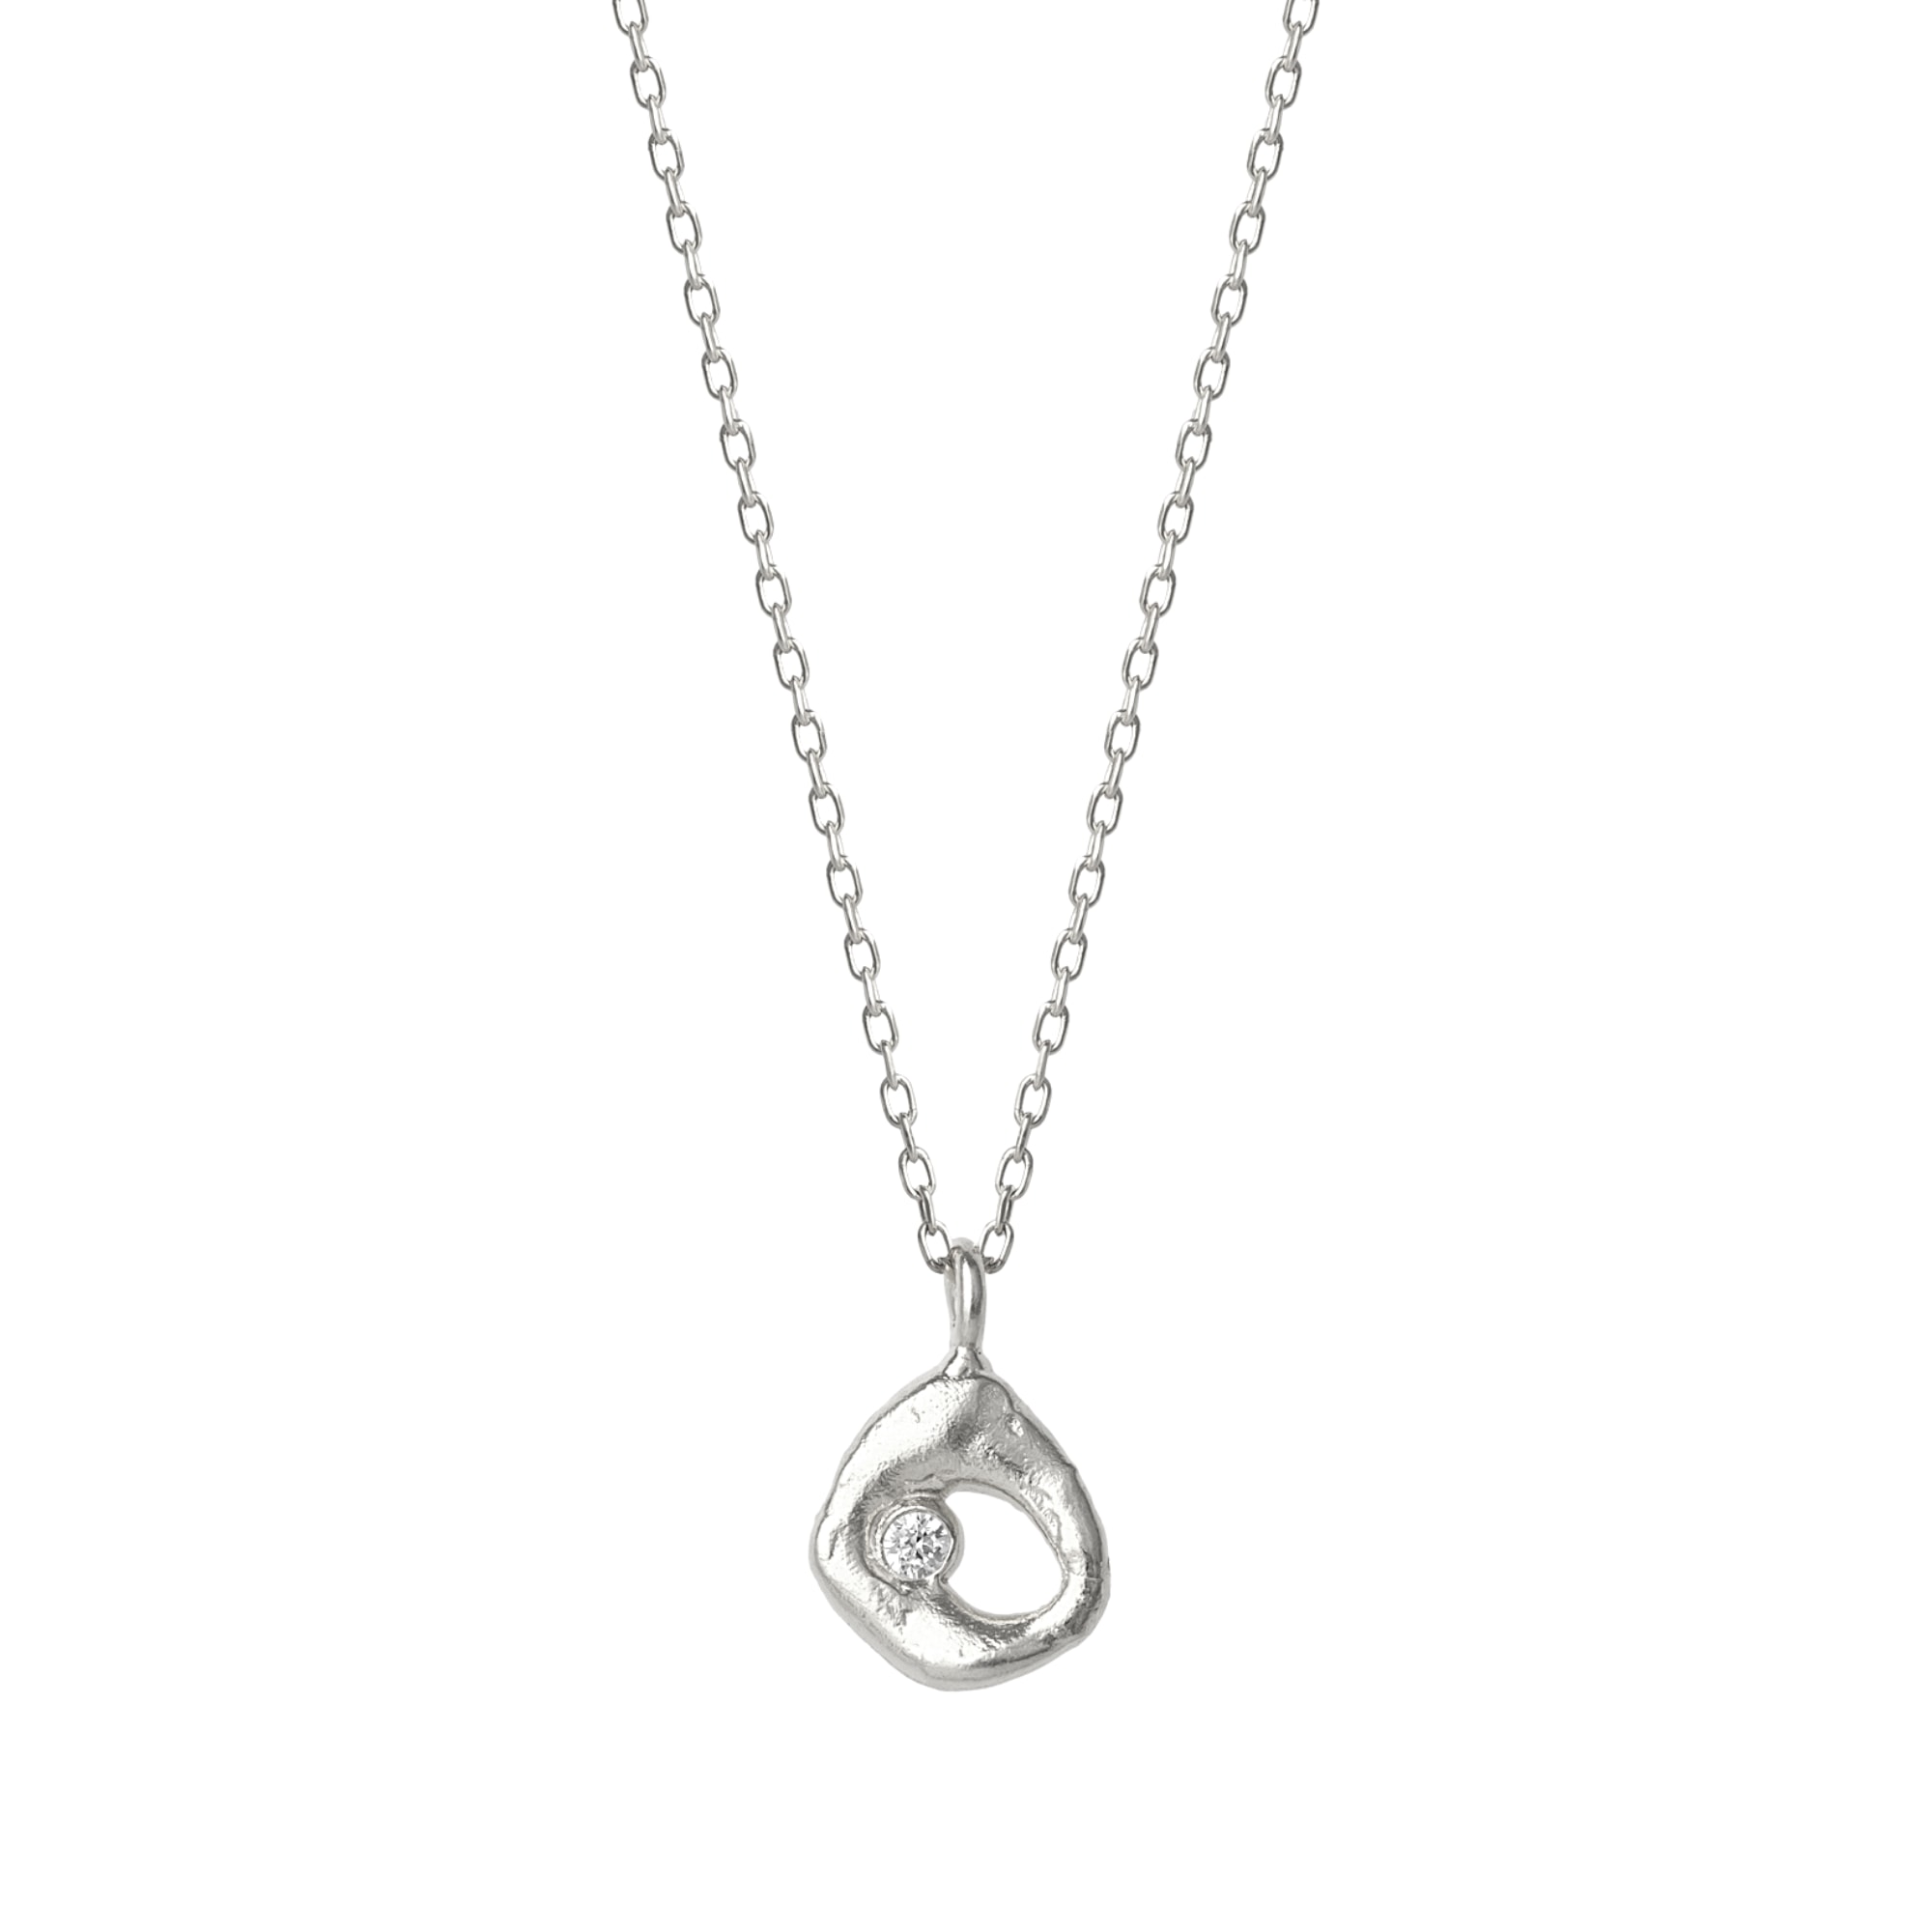 Spero London Women's Dripping Molten Natural Textured Sterling Silver Authentic Pendant Necklace - Silver In Metallic